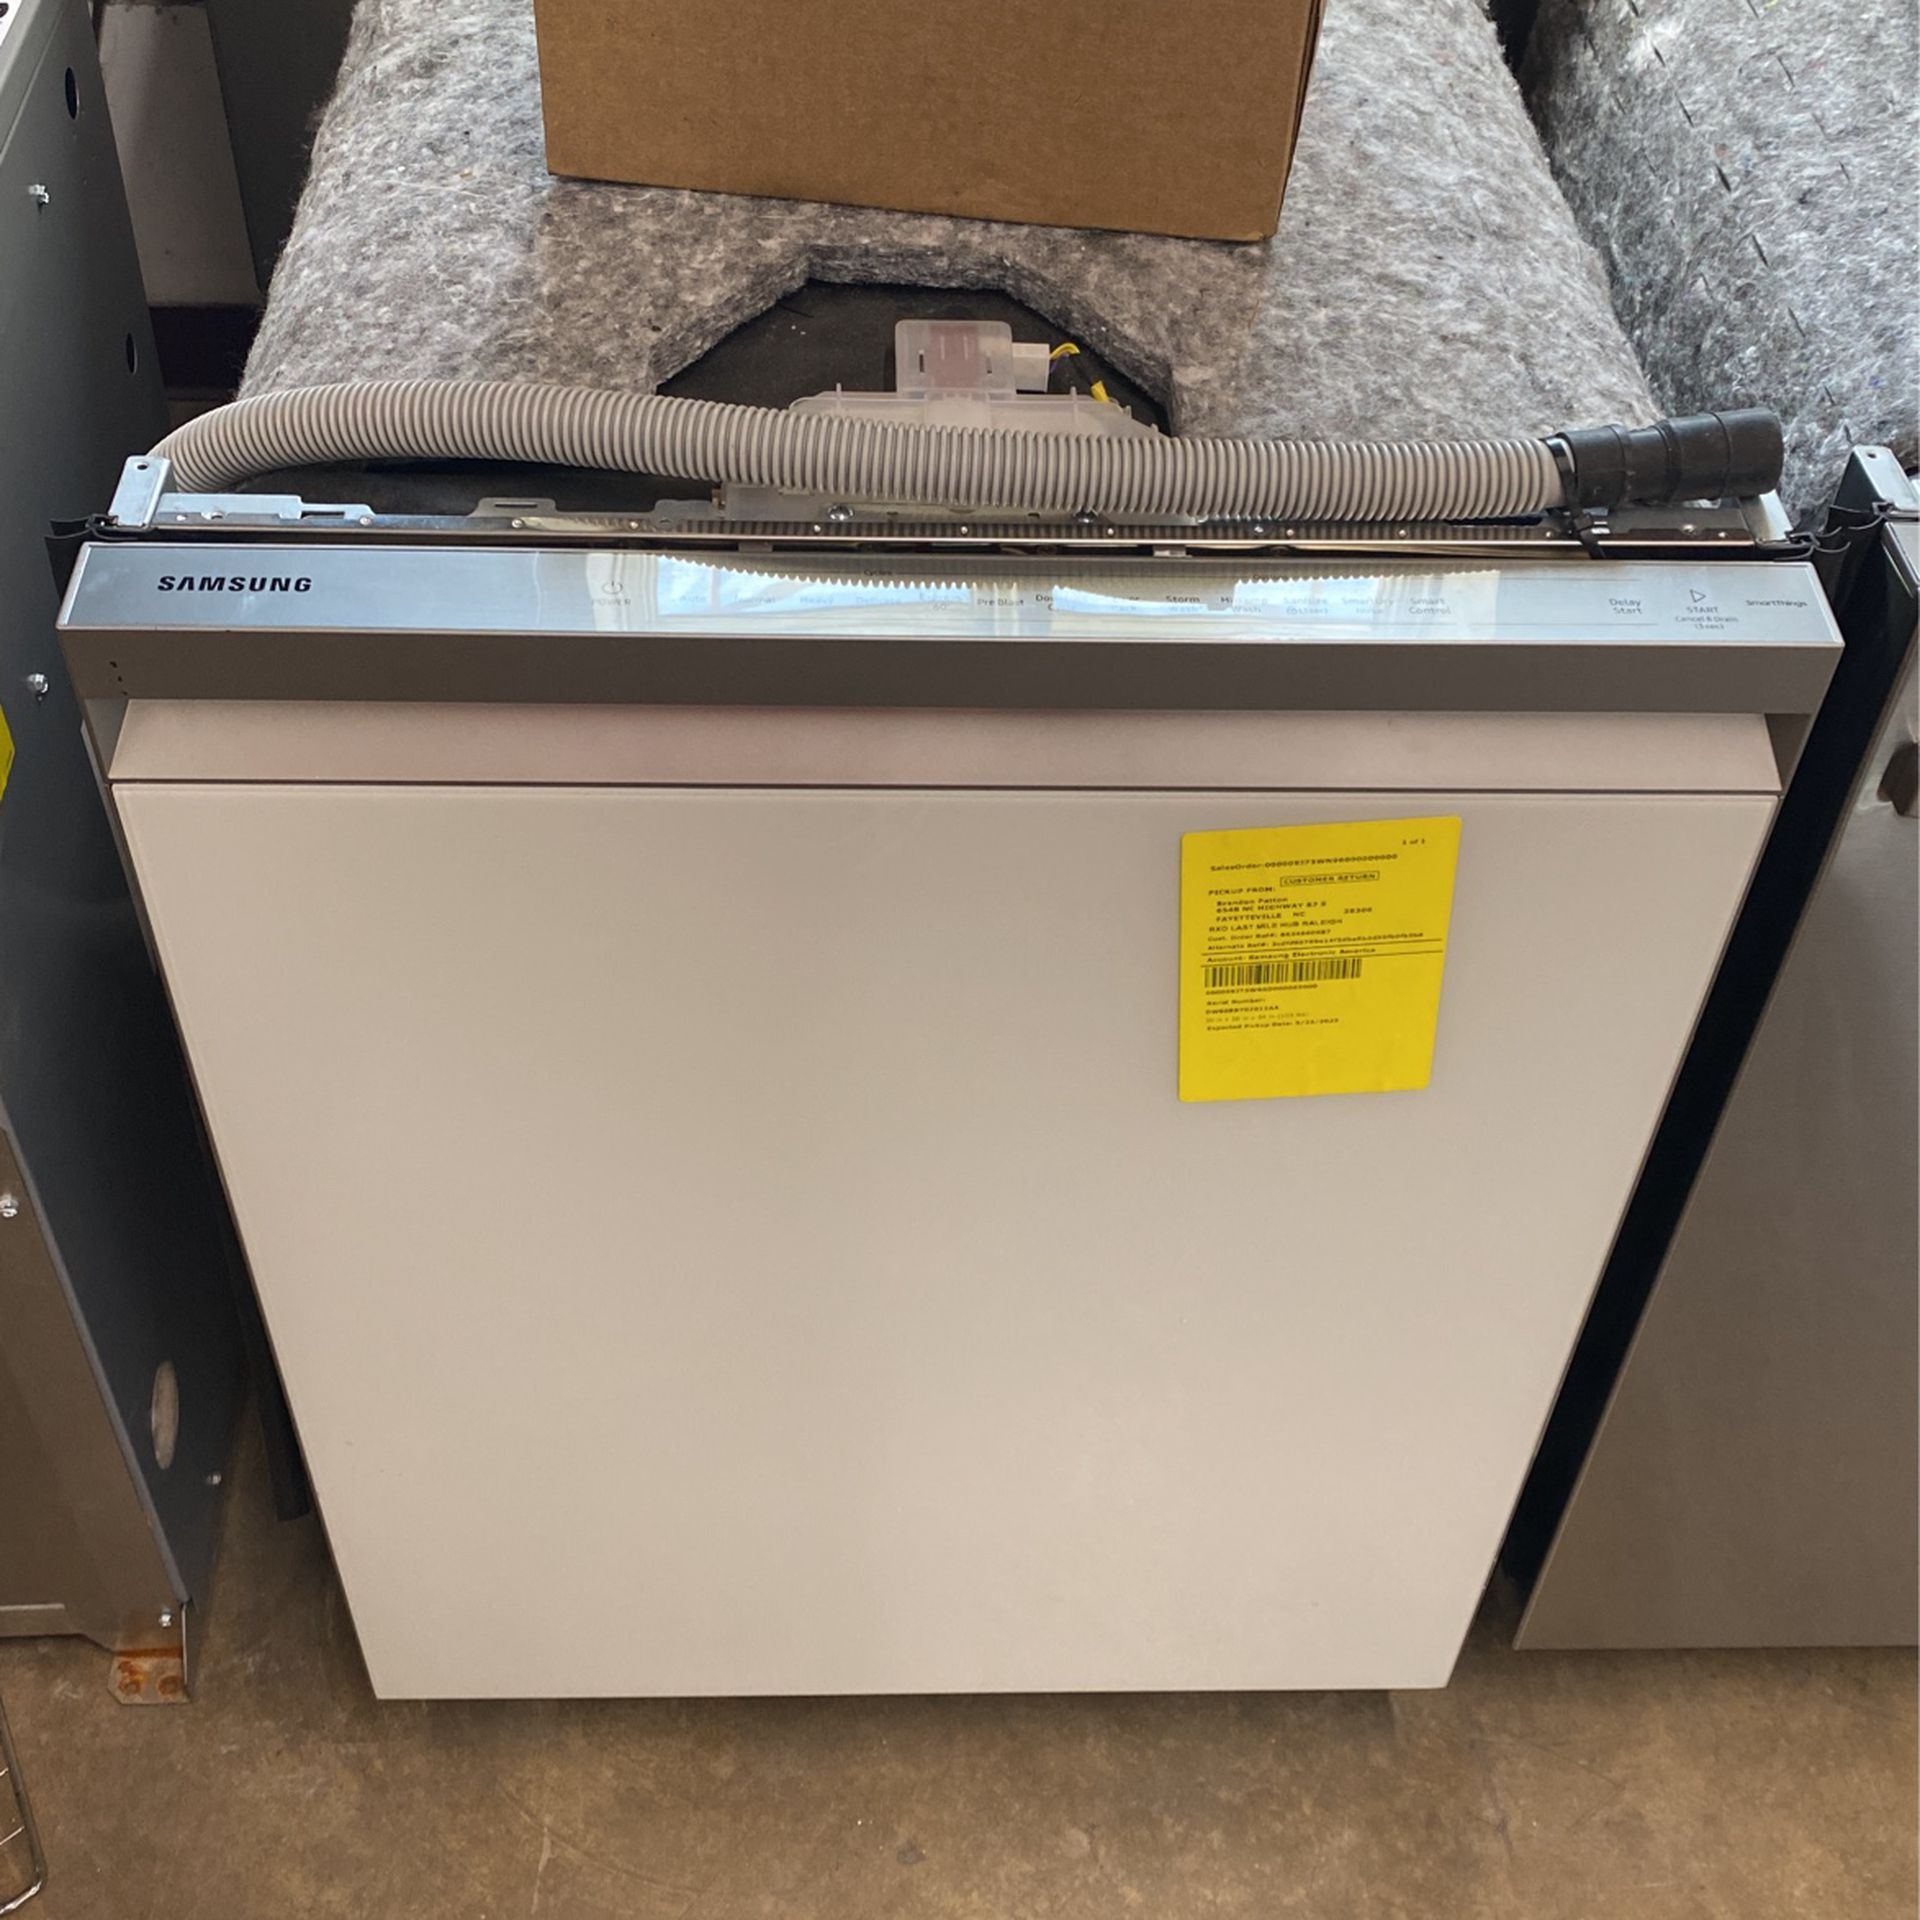 samsunng washer white color glass  no dents brand new